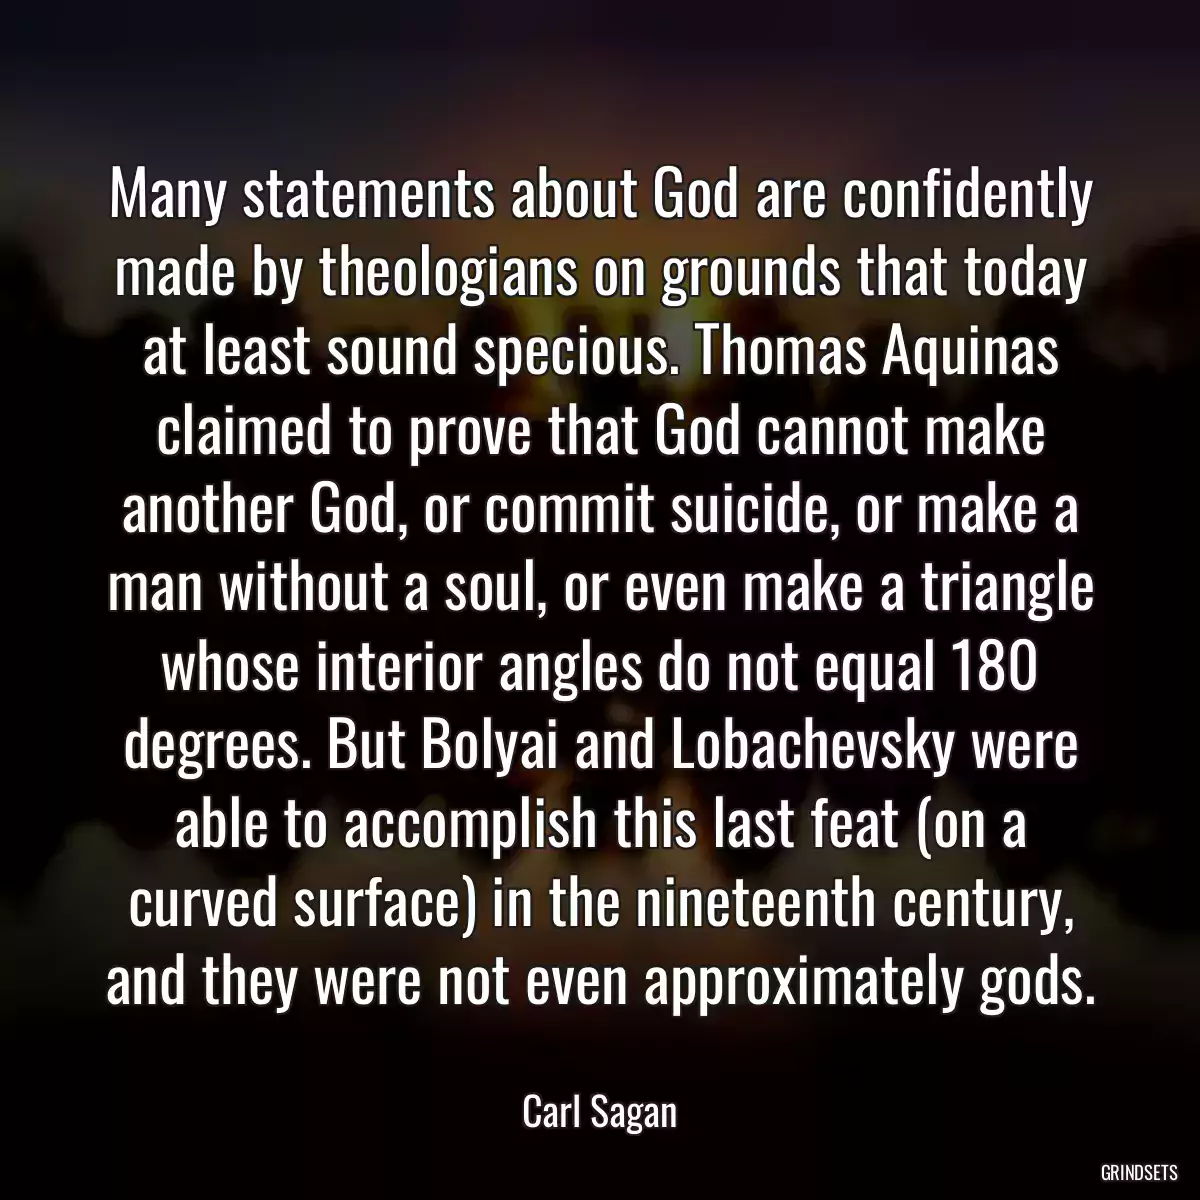 Many statements about God are confidently made by theologians on grounds that today at least sound specious. Thomas Aquinas claimed to prove that God cannot make another God, or commit suicide, or make a man without a soul, or even make a triangle whose interior angles do not equal 180 degrees. But Bolyai and Lobachevsky were able to accomplish this last feat (on a curved surface) in the nineteenth century, and they were not even approximately gods.